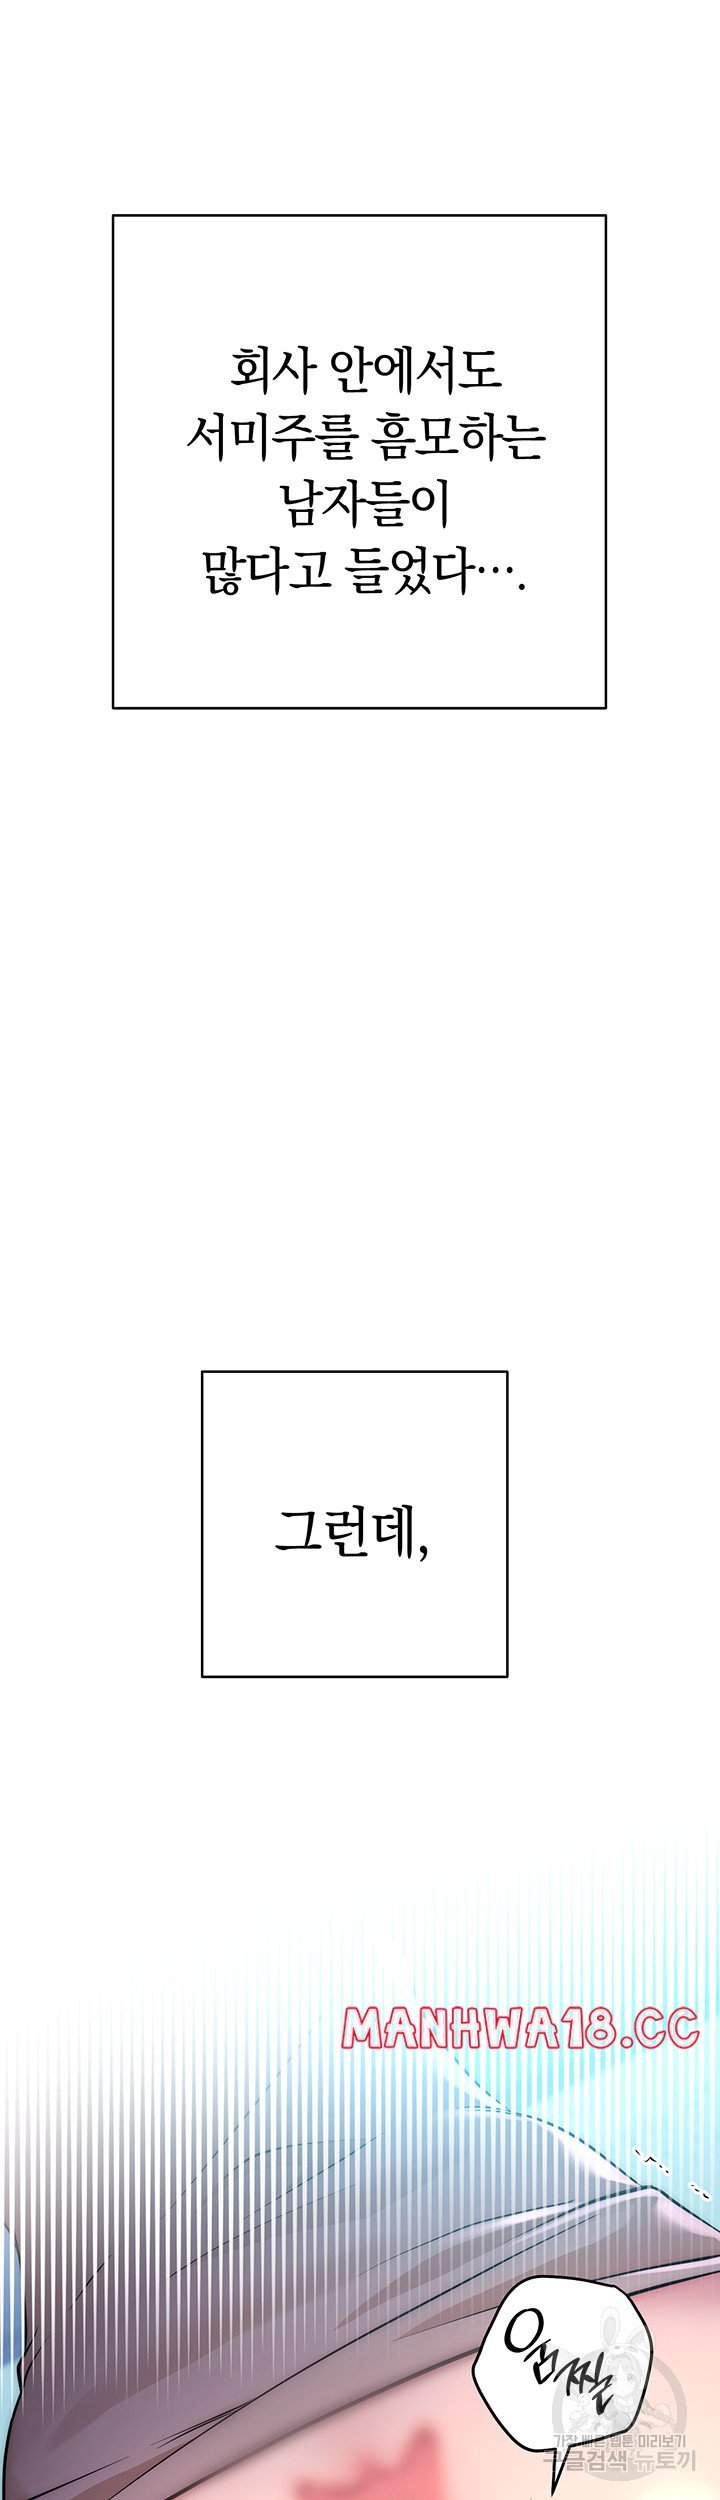 outsider-the-invisible-man-raw-chap-3-15